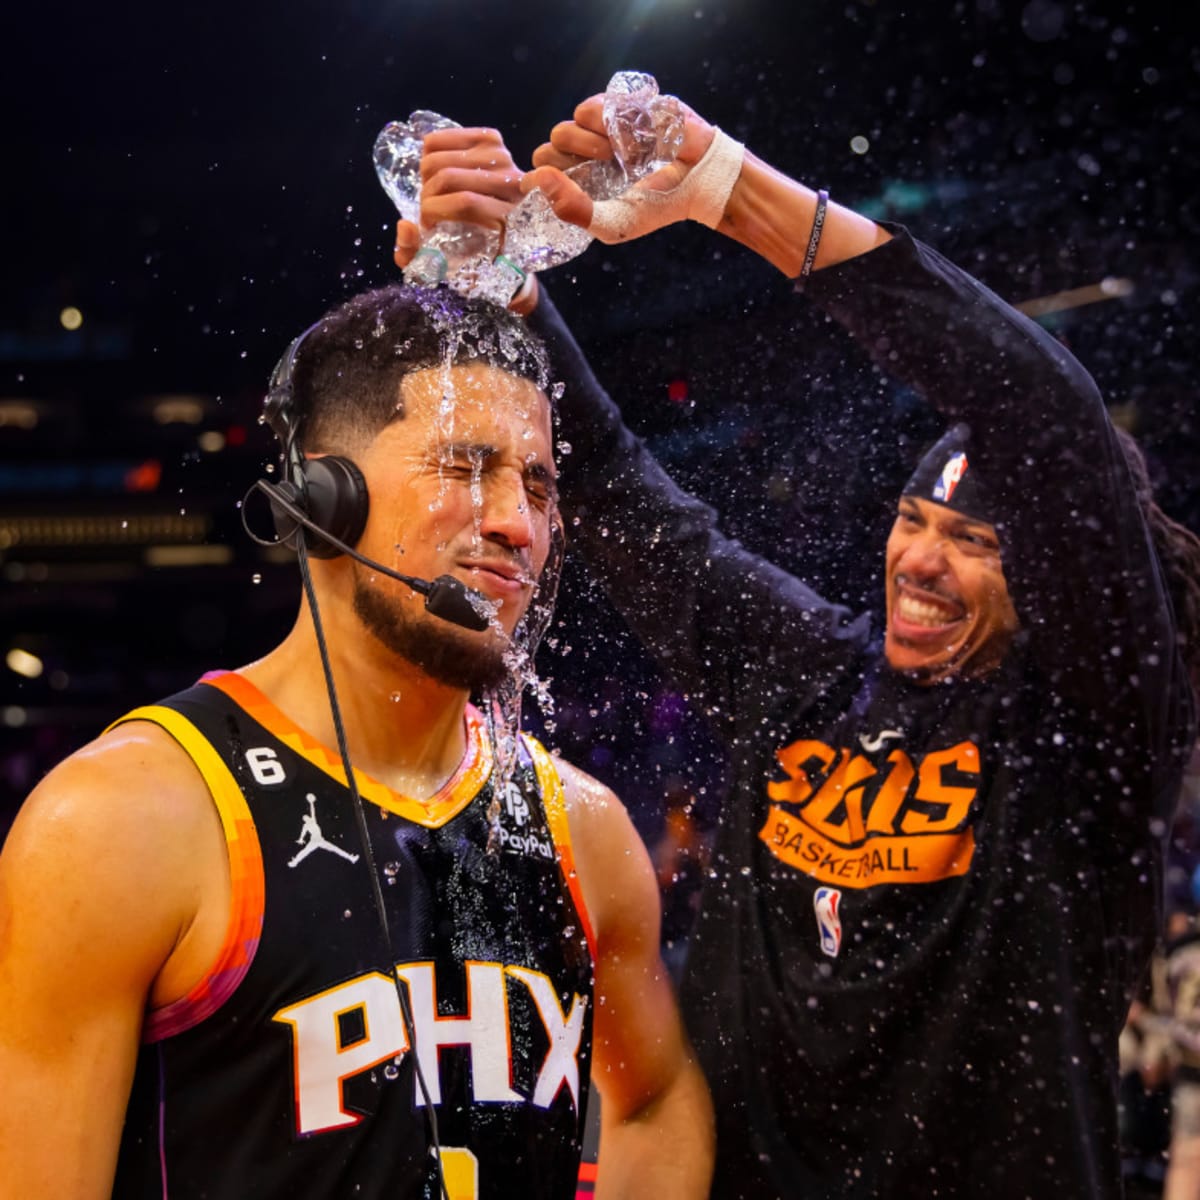 Phoenix Suns SG Devin Booker Staying Humble, Focused on Season Ahead -  Sports Illustrated Inside The Suns News, Analysis and More